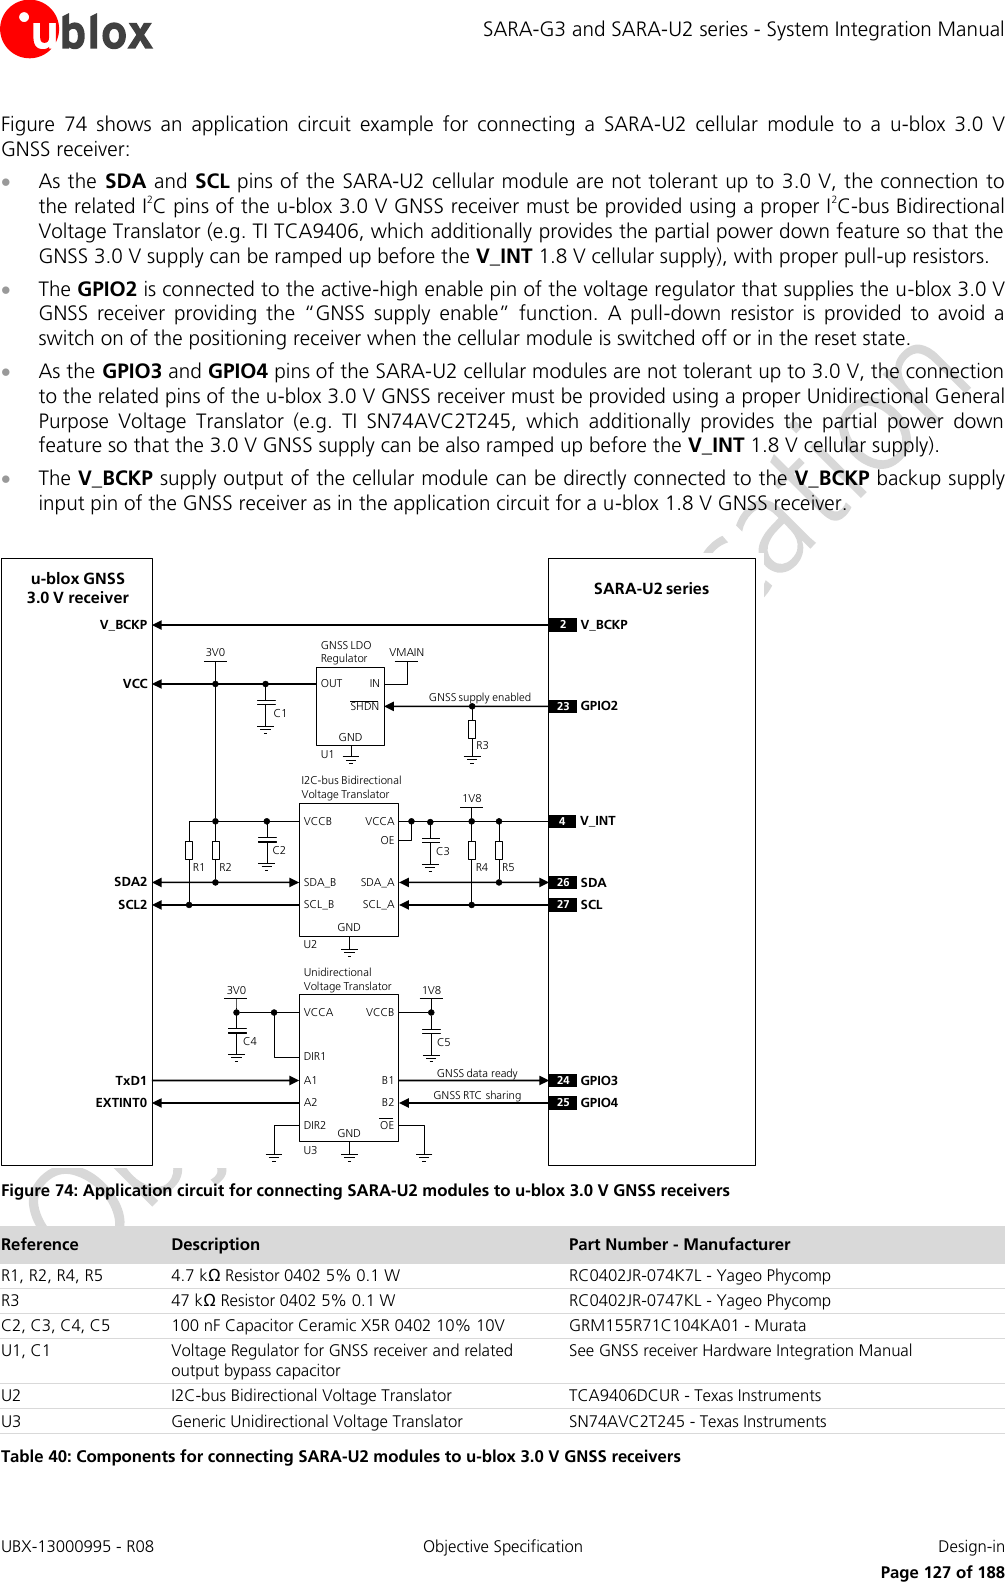 SARA-G3 and SARA-U2 series - System Integration Manual UBX-13000995 - R08  Objective Specification  Design-in     Page 127 of 188 Figure  74  shows  an  application  circuit  example  for  connecting  a  SARA-U2  cellular  module  to  a  u-blox  3.0  V GNSS receiver:  As the  SDA and SCL pins of the SARA-U2 cellular module are not tolerant up to 3.0 V, the connection to the related I2C pins of the u-blox 3.0 V GNSS receiver must be provided using a proper I2C-bus Bidirectional Voltage Translator (e.g. TI TCA9406, which additionally provides the partial power down feature so that the GNSS 3.0 V supply can be ramped up before the V_INT 1.8 V cellular supply), with proper pull-up resistors.  The GPIO2 is connected to the active-high enable pin of the voltage regulator that supplies the u-blox 3.0 V GNSS  receiver  providing  the  “GNSS  supply  enable”  function.  A  pull-down  resistor  is  provided  to  avoid  a switch on of the positioning receiver when the cellular module is switched off or in the reset state.  As the GPIO3 and GPIO4 pins of the SARA-U2 cellular modules are not tolerant up to 3.0 V, the connection to the related pins of the u-blox 3.0 V GNSS receiver must be provided using a proper Unidirectional General Purpose  Voltage  Translator  (e.g.  TI  SN74AVC2T245,  which  additionally  provides  the  partial  power  down feature so that the 3.0 V GNSS supply can be also ramped up before the V_INT 1.8 V cellular supply).  The V_BCKP supply output of the cellular module can be directly connected to the V_BCKP backup supply input pin of the GNSS receiver as in the application circuit for a u-blox 1.8 V GNSS receiver.  SARA-U2 seriesu-blox GNSS 3.0 V receiver24 GPIO325 GPIO41V8B1 A1GNDU3B2A2VCCBVCCAUnidirectionalVoltage TranslatorC4 C53V0TxD1EXTINT0R1INOUTGNDGNSS LDORegulatorSHDNR2VMAIN3V0U123 GPIO226 SDA27 SCLR4 R51V8SDA_A SDA_BGNDU2SCL_ASCL_BVCCAVCCBI2C-bus Bidirectional Voltage Translator4V_INTC1C2 C3R3SDA2SCL2VCCDIR1DIR22V_BCKPV_BCKPOEOEGNSS data readyGNSS RTC sharingGNSS supply enabled Figure 74: Application circuit for connecting SARA-U2 modules to u-blox 3.0 V GNSS receivers Reference Description Part Number - Manufacturer R1, R2, R4, R5 4.7 kΩ Resistor 0402 5% 0.1 W  RC0402JR-074K7L - Yageo Phycomp R3 47 kΩ Resistor 0402 5% 0.1 W  RC0402JR-0747KL - Yageo Phycomp C2, C3, C4, C5 100 nF Capacitor Ceramic X5R 0402 10% 10V GRM155R71C104KA01 - Murata U1, C1 Voltage Regulator for GNSS receiver and related output bypass capacitor See GNSS receiver Hardware Integration Manual U2 I2C-bus Bidirectional Voltage Translator TCA9406DCUR - Texas Instruments U3 Generic Unidirectional Voltage Translator SN74AVC2T245 - Texas Instruments Table 40: Components for connecting SARA-U2 modules to u-blox 3.0 V GNSS receivers 